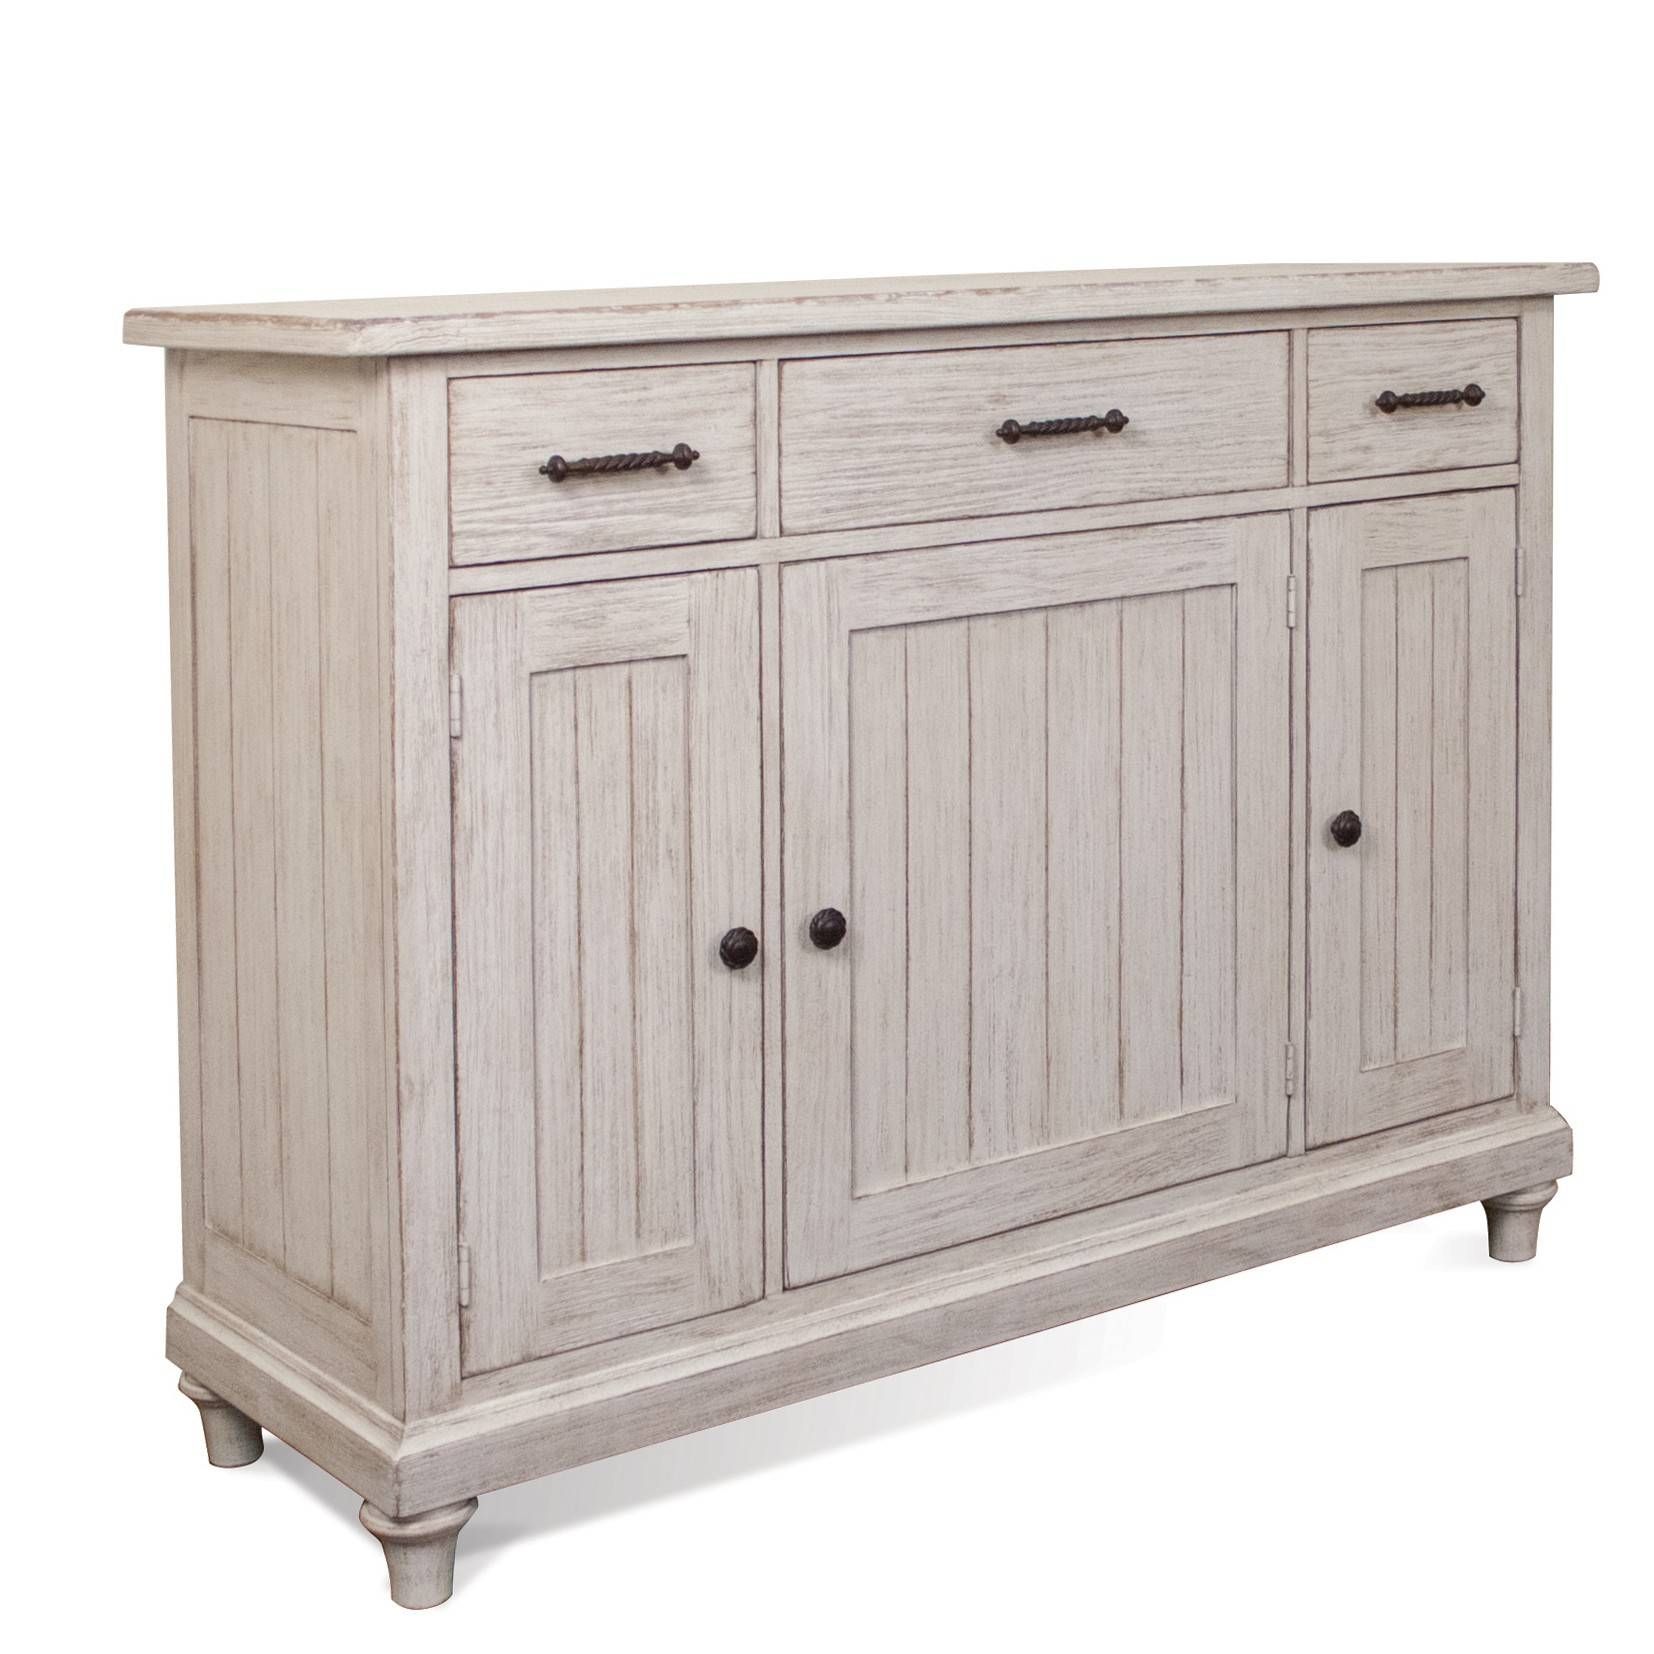 Aberdeen Wood Sideboard Server In Weathered Worn White Within White Wooden Sideboard (View 1 of 20)